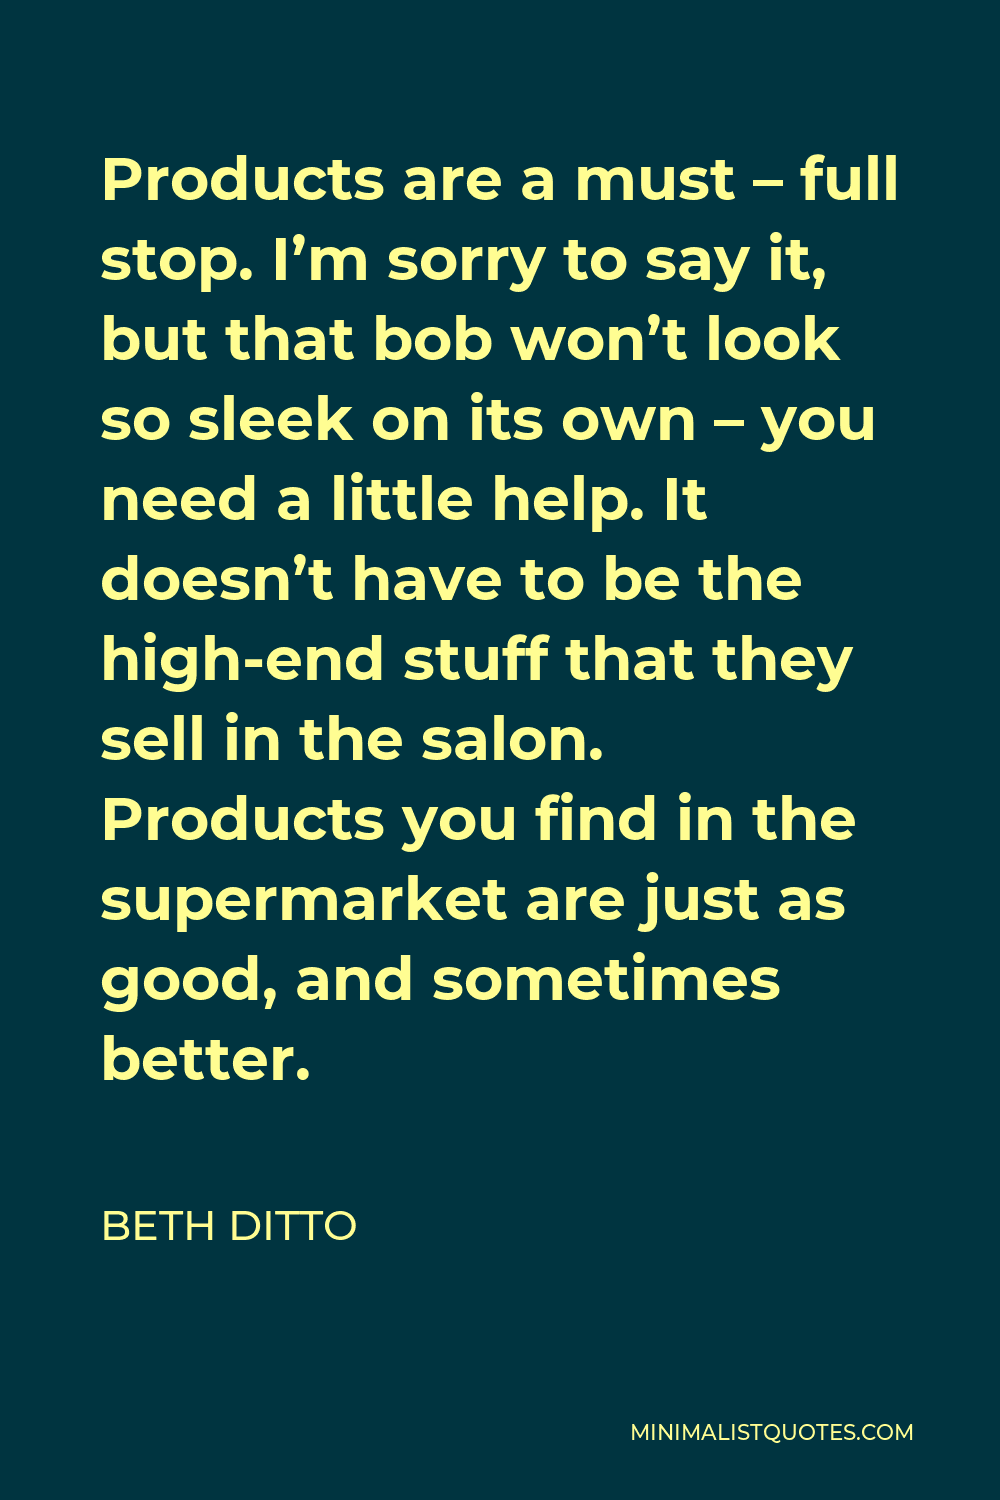 Beth Ditto Quote: Products are a must - full stop. I'm sorry to say it, but  that bob won't look so sleek on its own - you need a little help. It